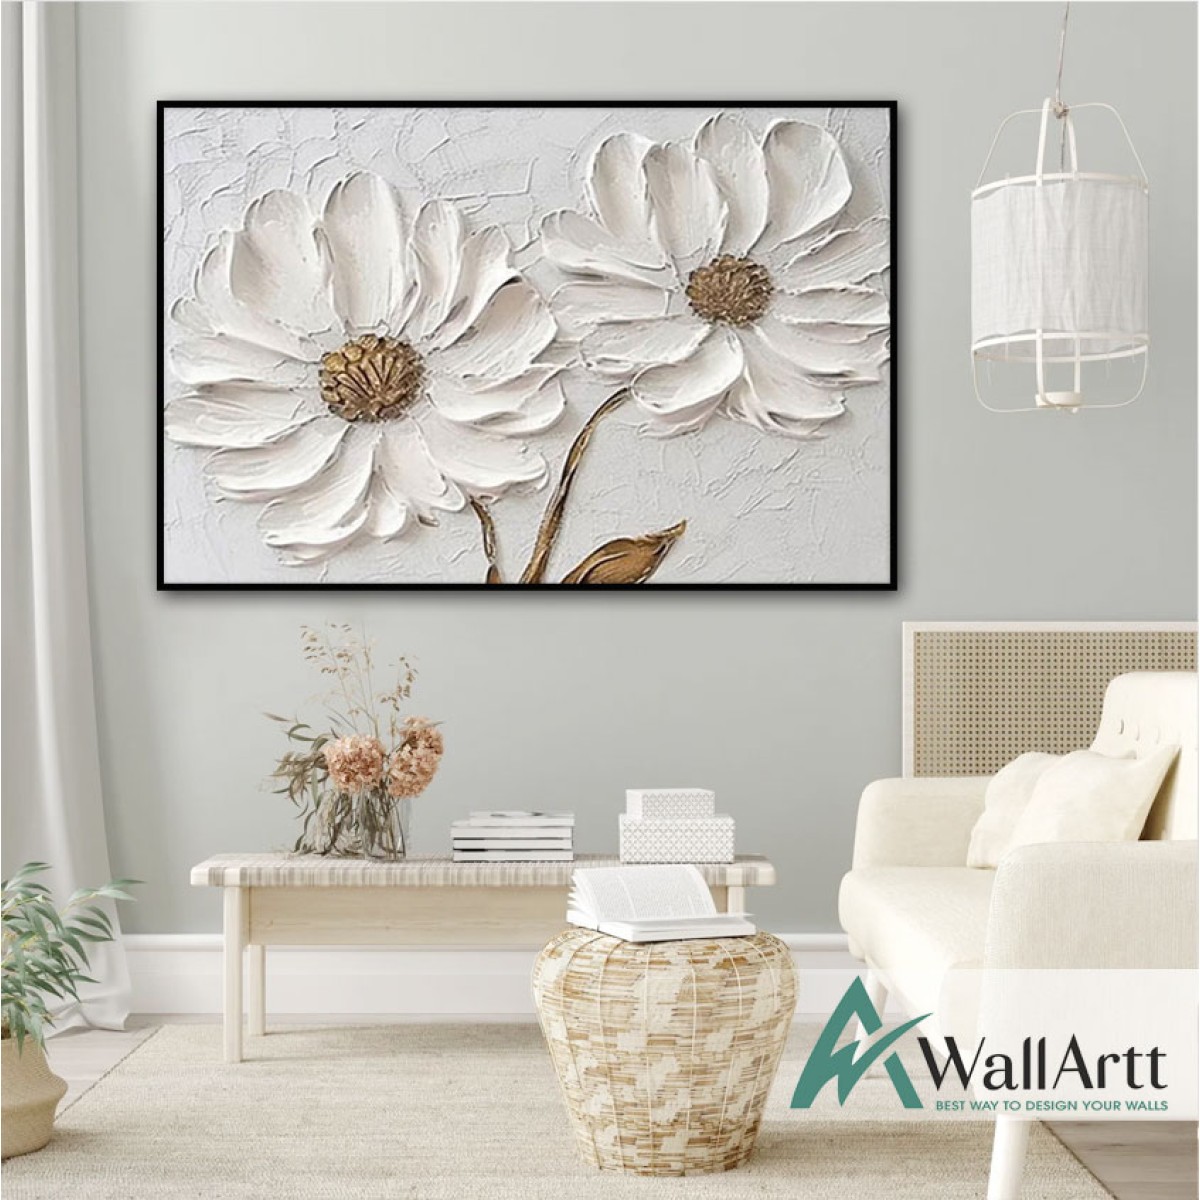 Golden Daisy 3d Heavy Textured Partial Oil Painting